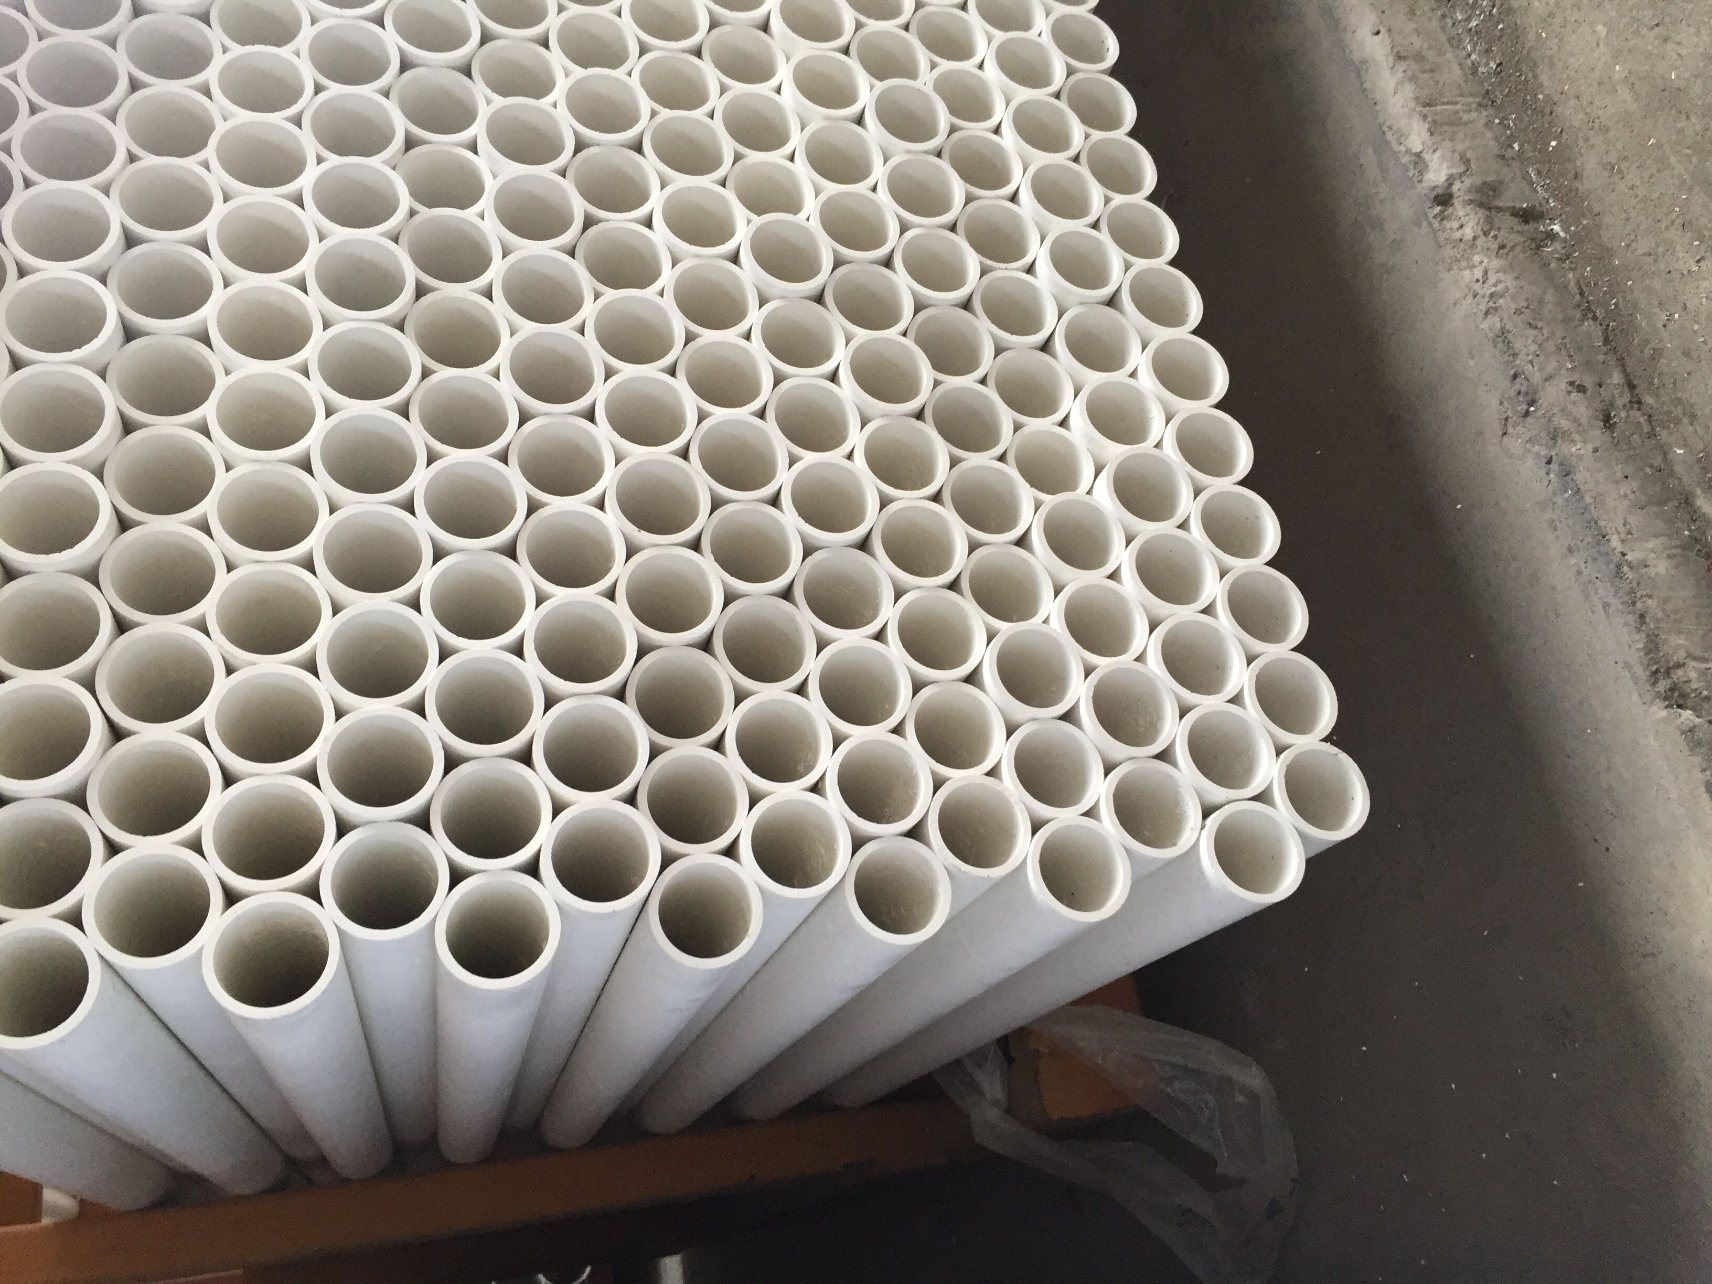 ASTM D1785 Sch40 PVC-U Potable Water Pipes and BS3505 Pressure Pipes for Cold Potable Water